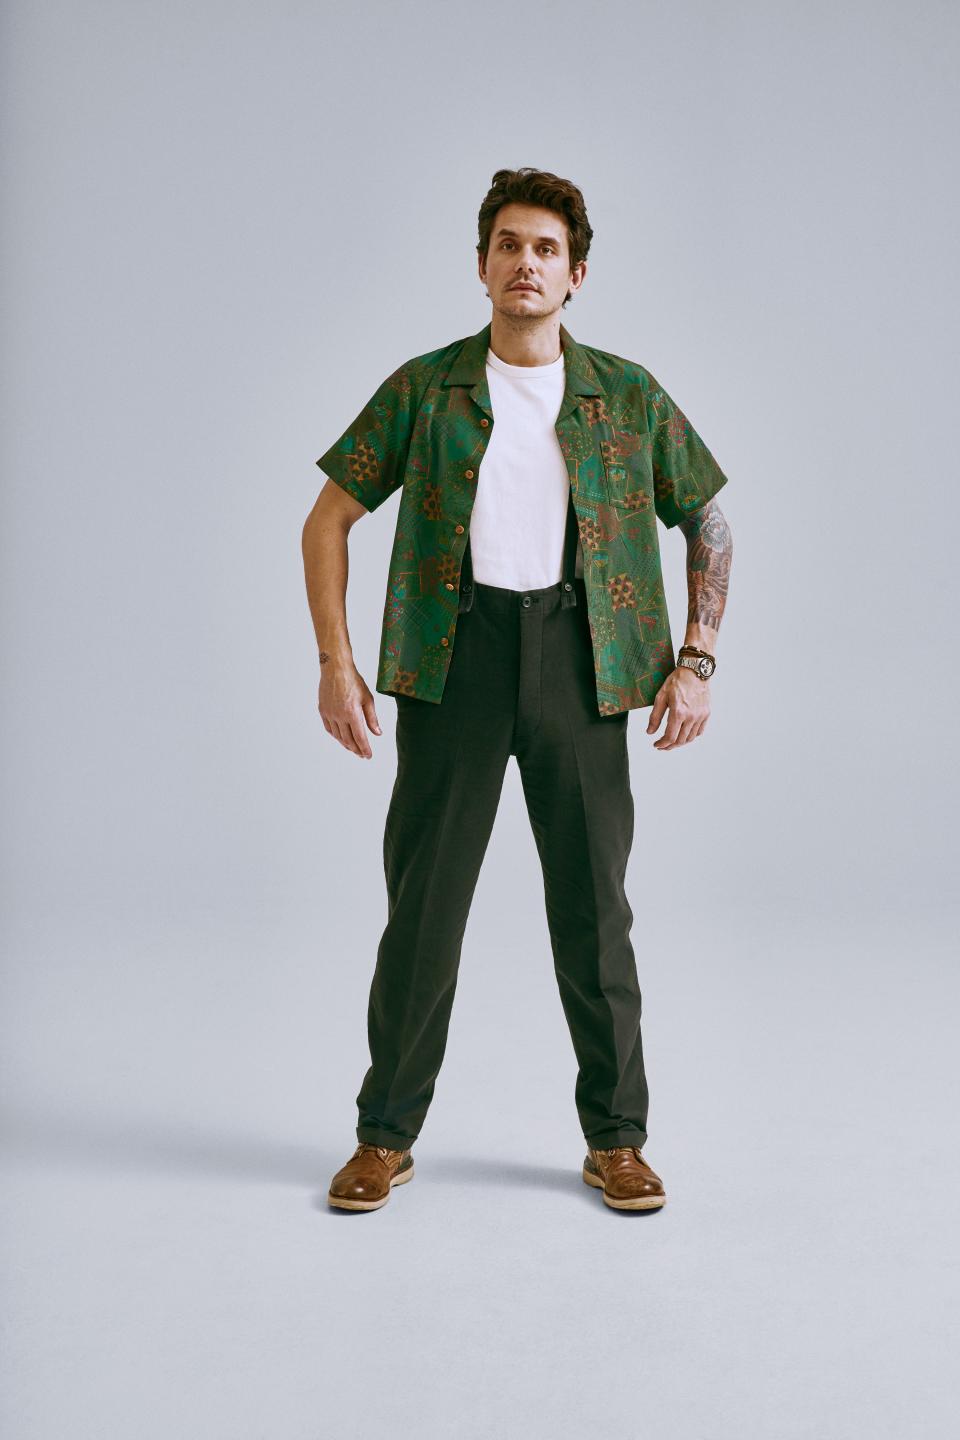 <cite class="credit">Camp shirt, (S/S '19), Sublig Crew Tee, trousers (S/S '19), suspenders, Seven-Hole '73-Folk boots (2009), by Visvim / Vintage Oyster Perpetual Cosmograph Daytona “Paul Newman” watch ref. 6263, by Rolex</cite>